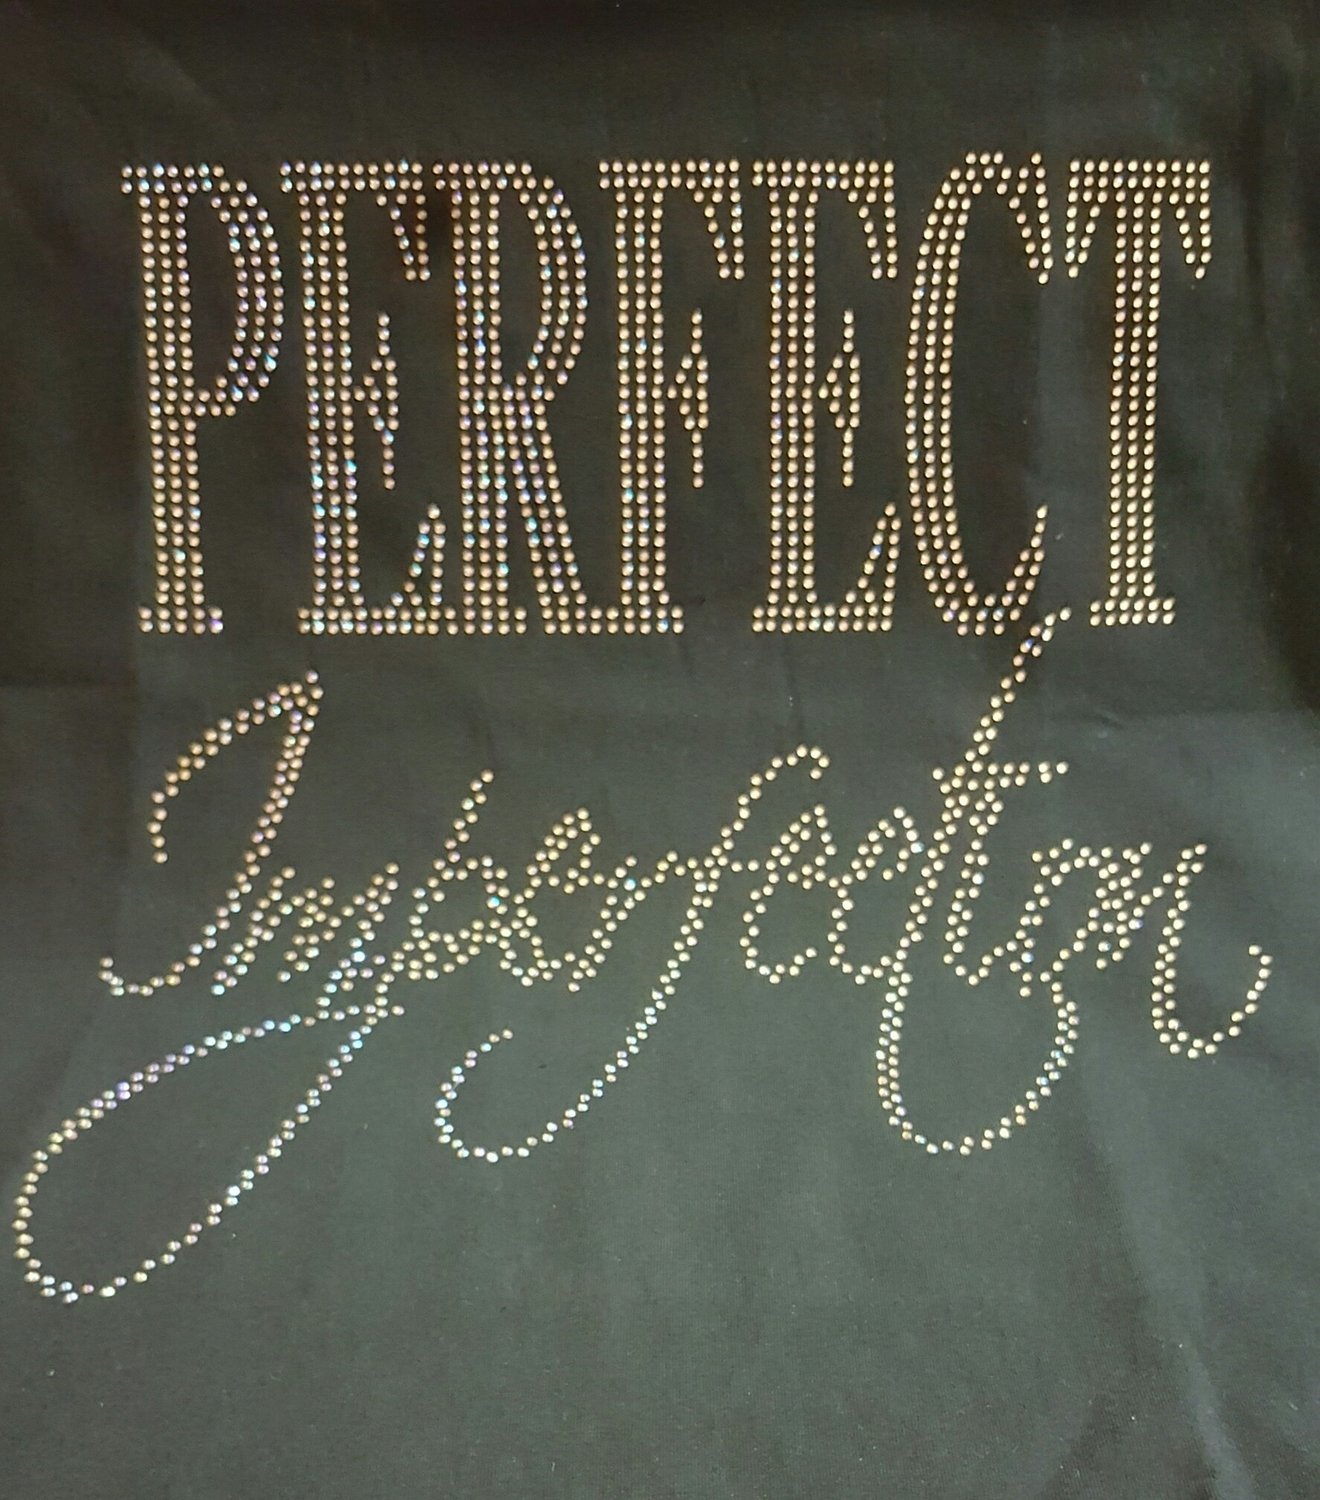 Perfect Imperfection